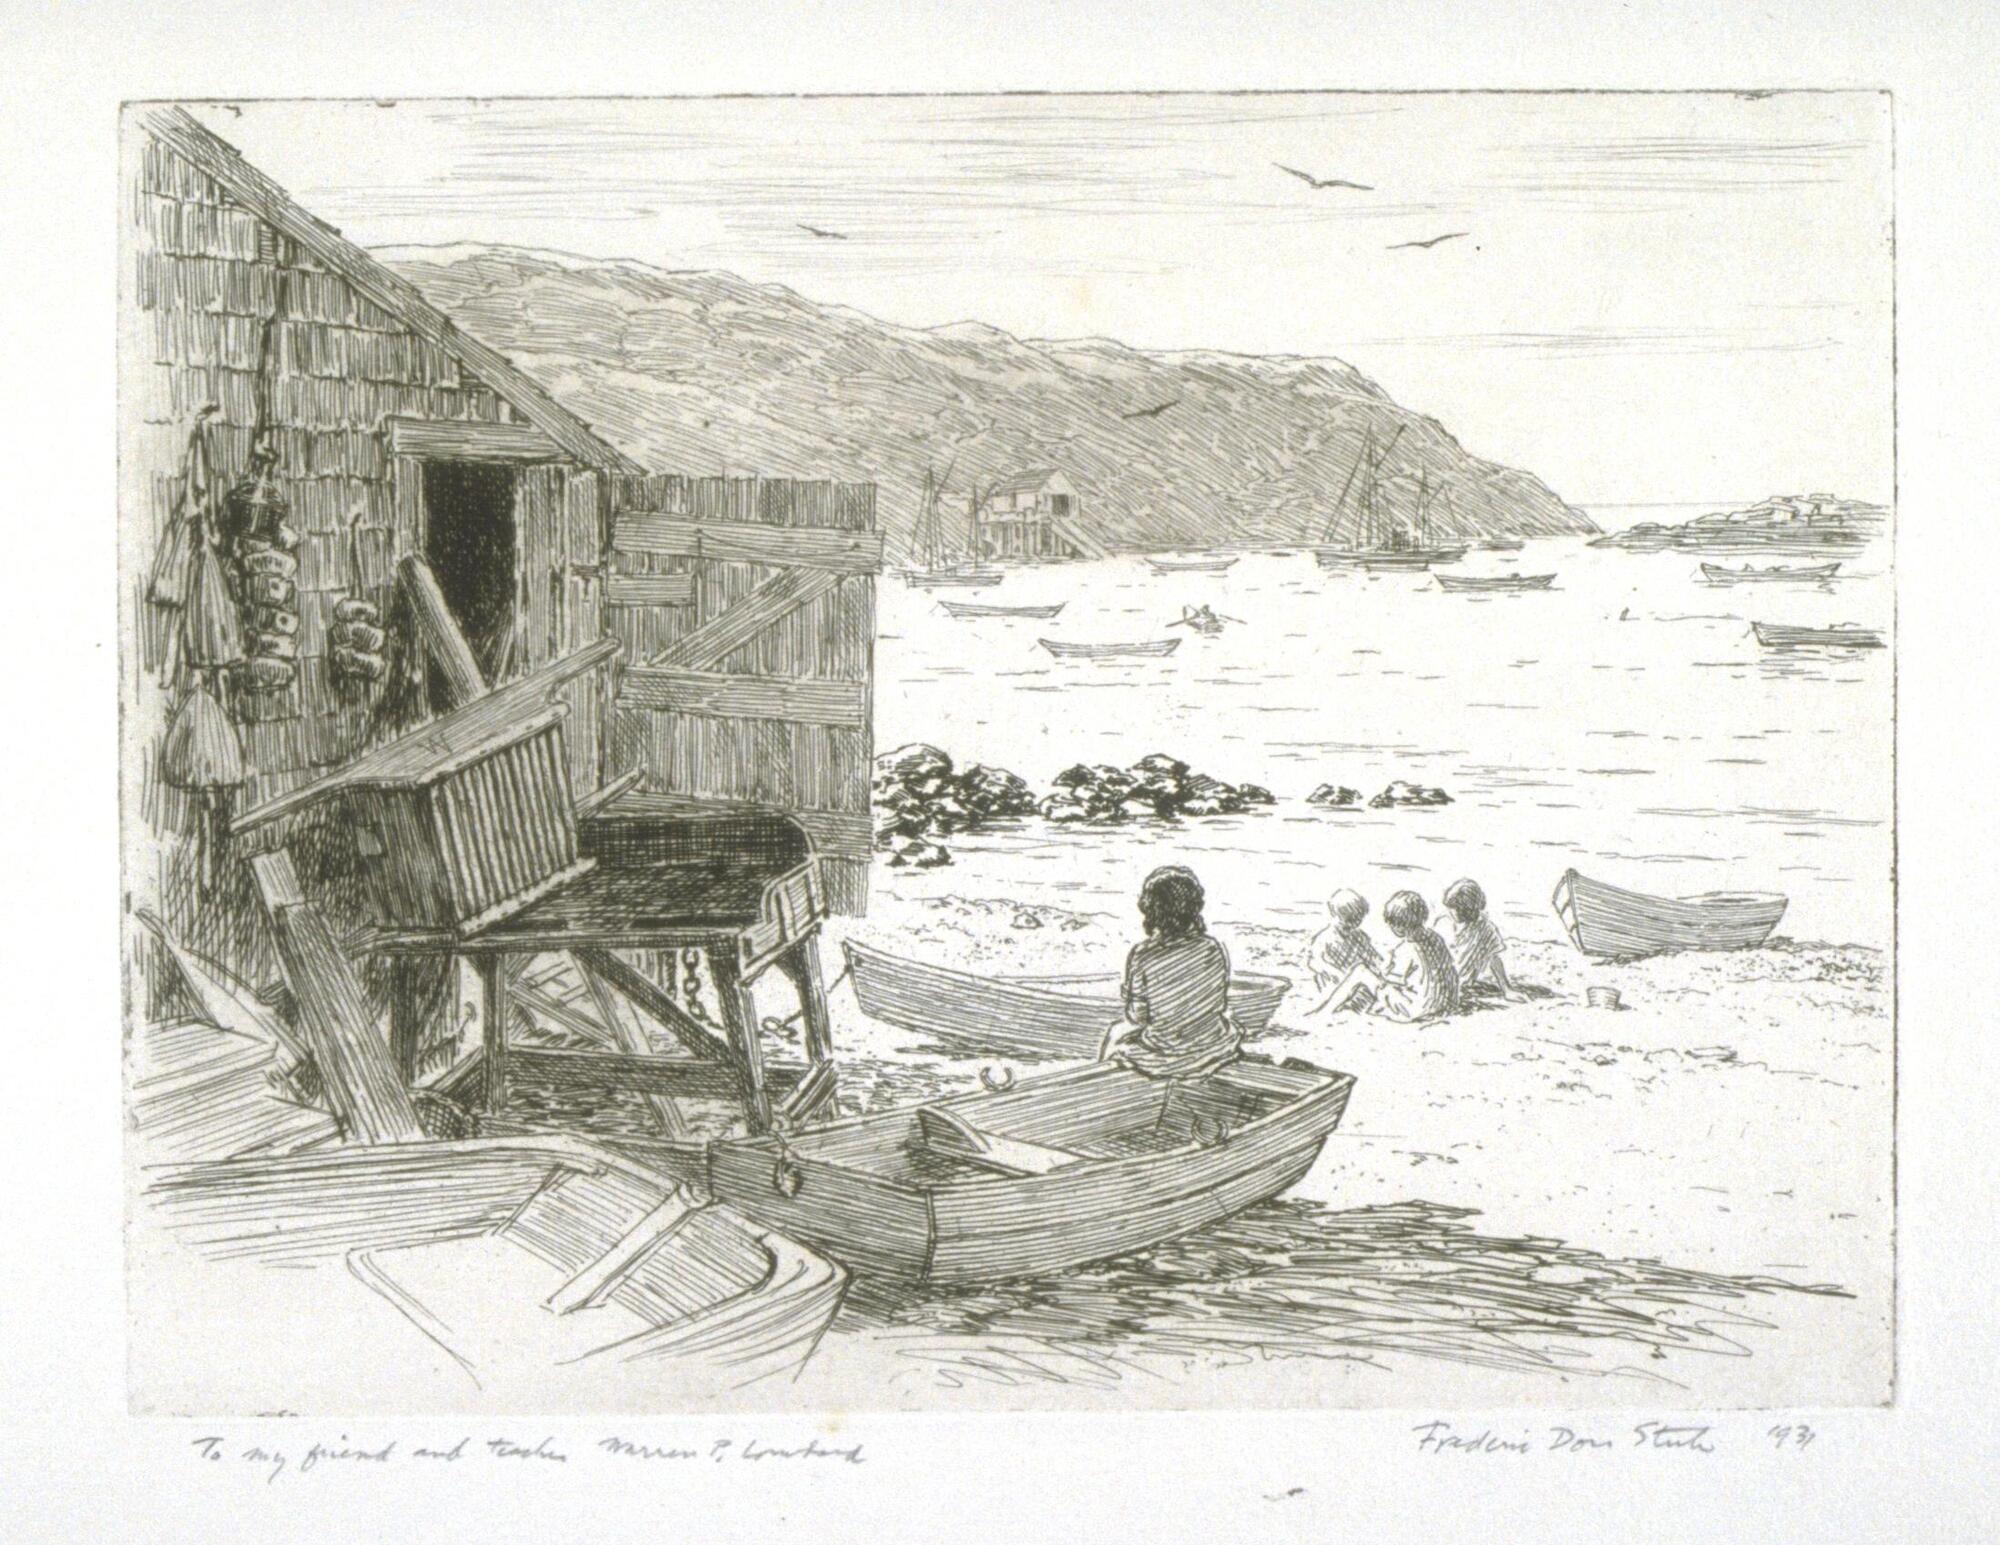 Print of family on beach. Mother sits on boat next to shed while children play in the sand. <br /><br />
EC 2017